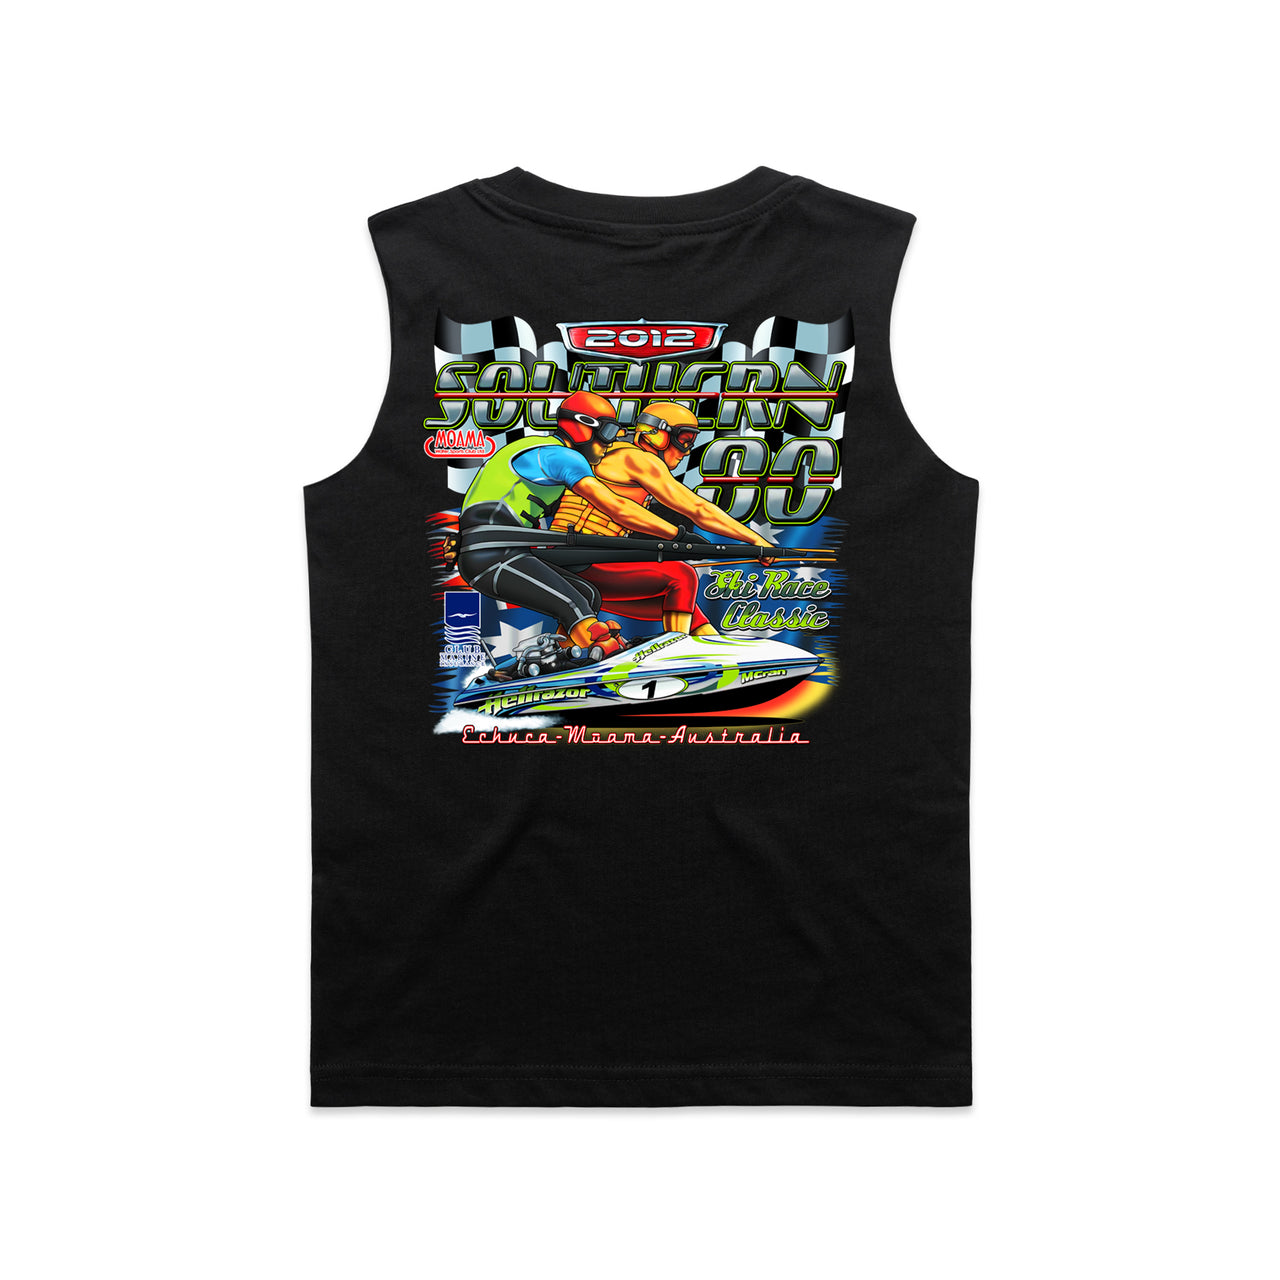 S80 2012 Hellrazor Event Youth/Kids Tank